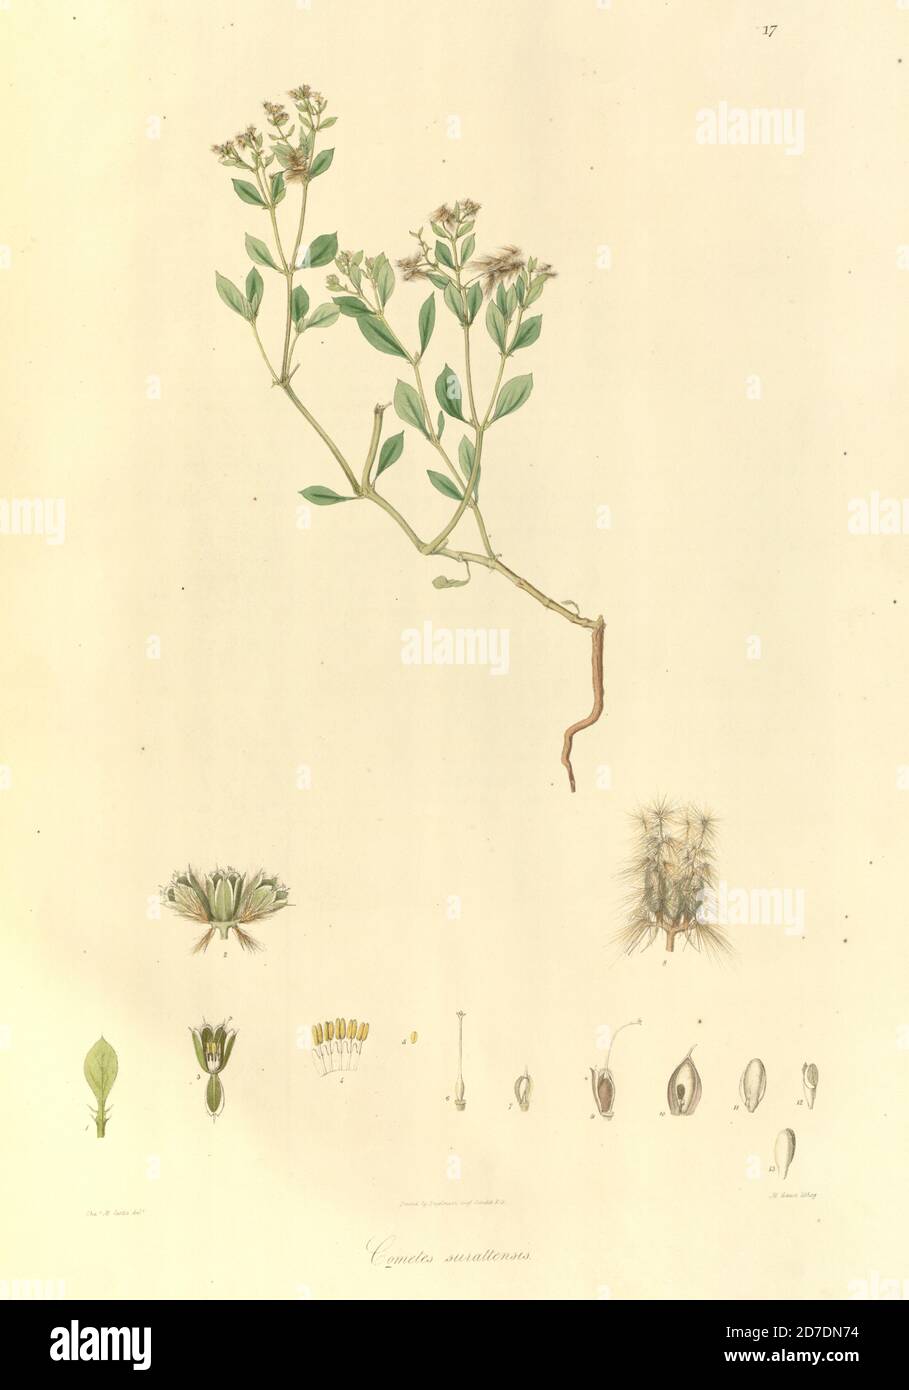 Cometes surattensis From Plantae Asiaticae rariores, or, Descriptions and figures of a select number of unpublished East Indian plants Volume 1 by N. Wallich. Nathaniel Wolff Wallich FRS FRSE (28 January 1786 – 28 April 1854) was a surgeon and botanist of Danish origin who worked in India, initially in the Danish settlement near Calcutta and later for the Danish East India Company and the British East India Company. He was involved in the early development of the Calcutta Botanical Garden, describing many new plant species and developing a large herbarium collection which was distributed to co Stock Photo